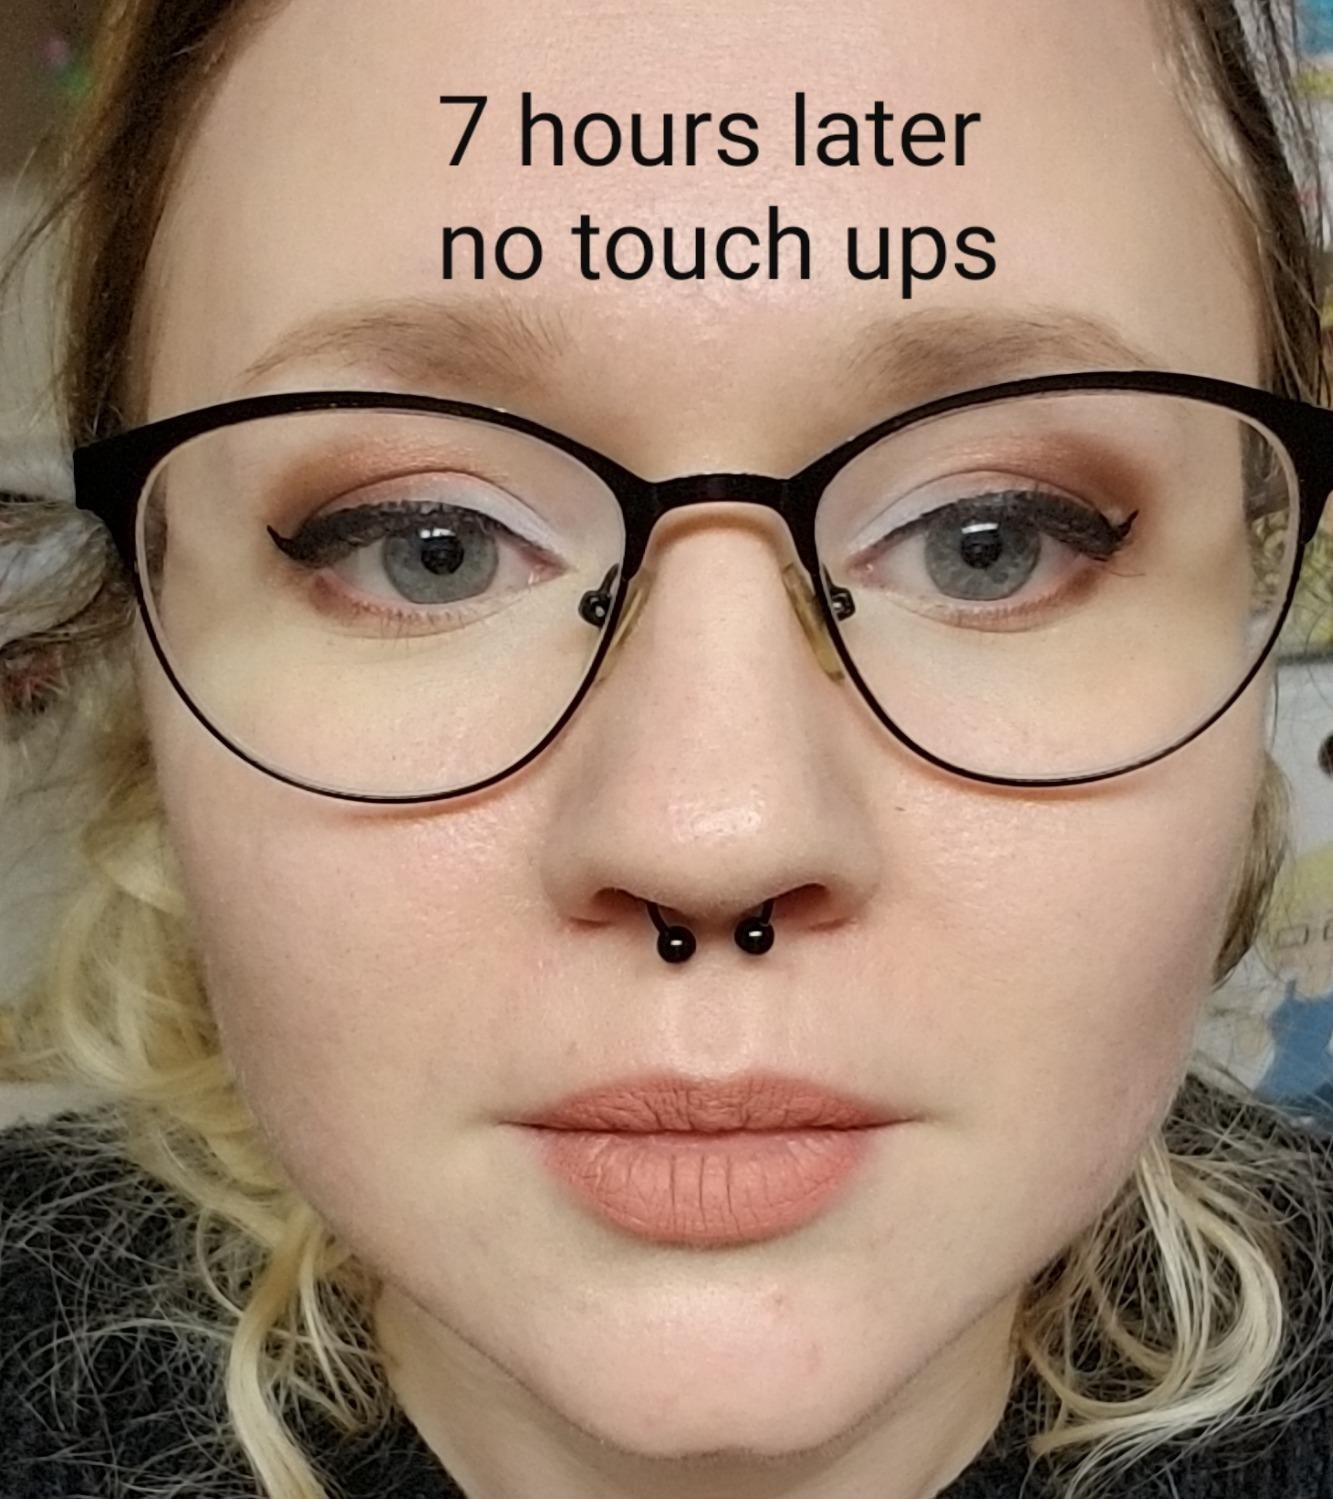 reviewer with makeup on that says 7 hours later no touch ups